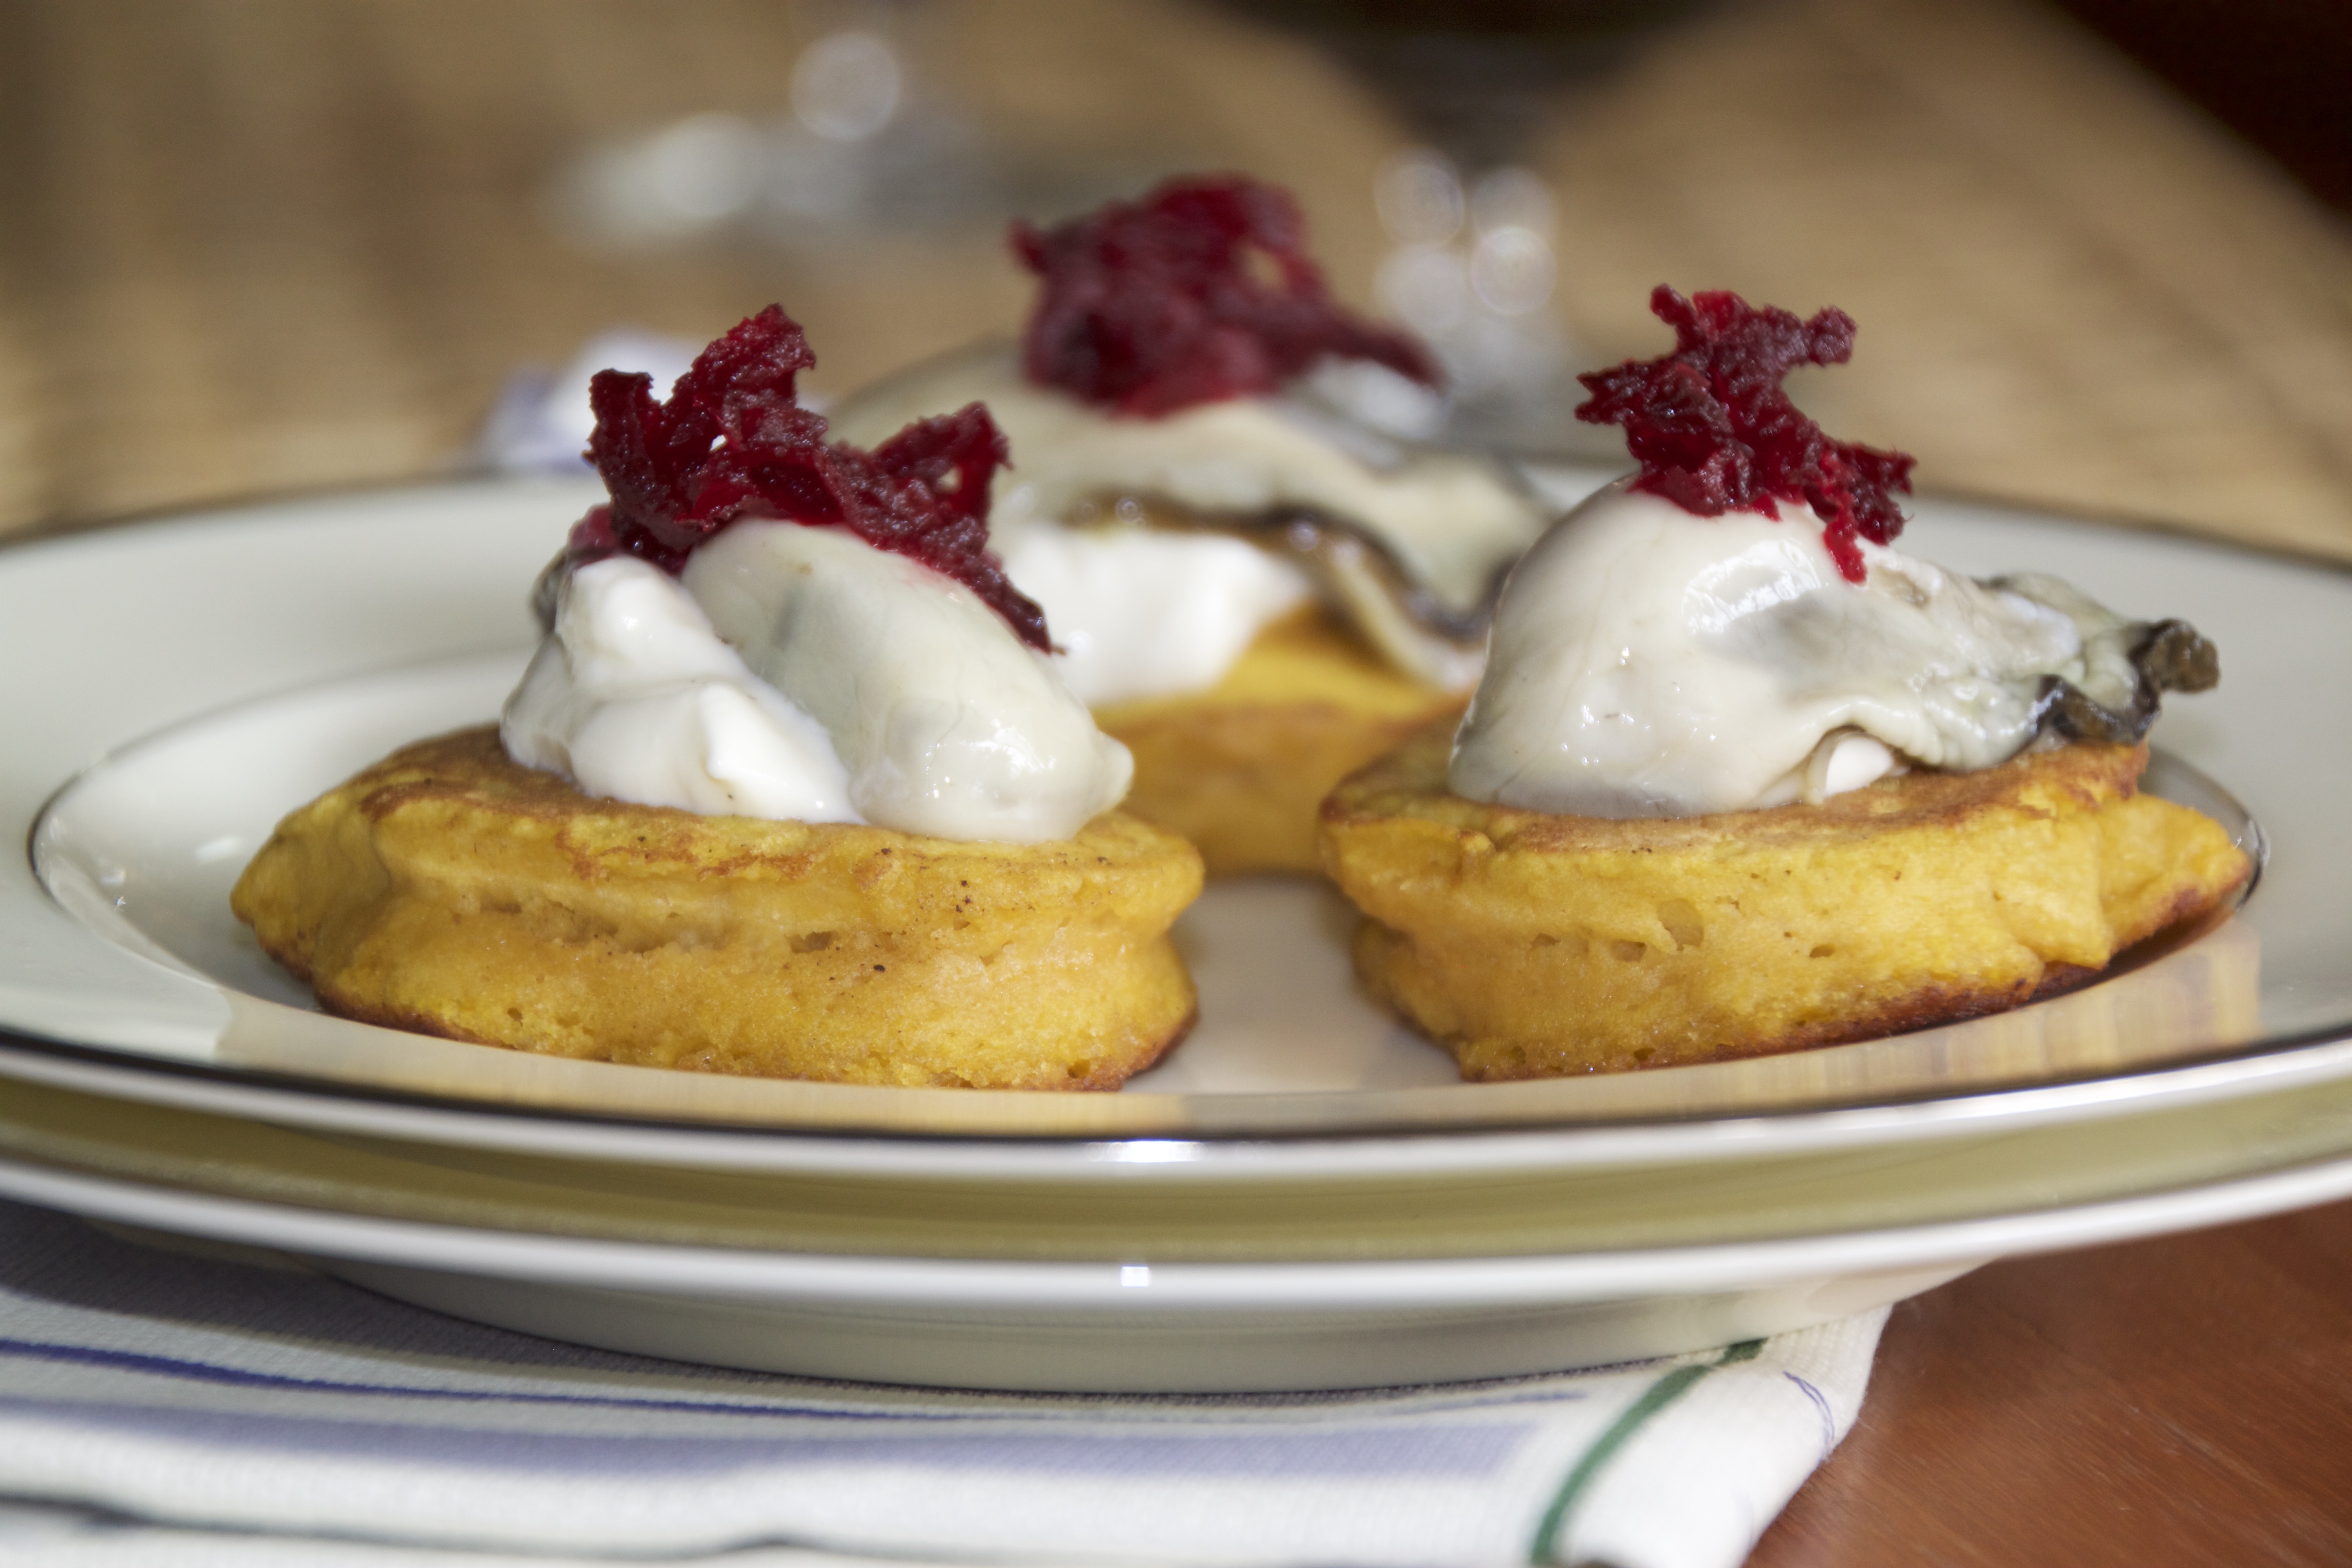 PUMPKIN AND ALE BLINI WITH OYSTERS AND BEET RELISH